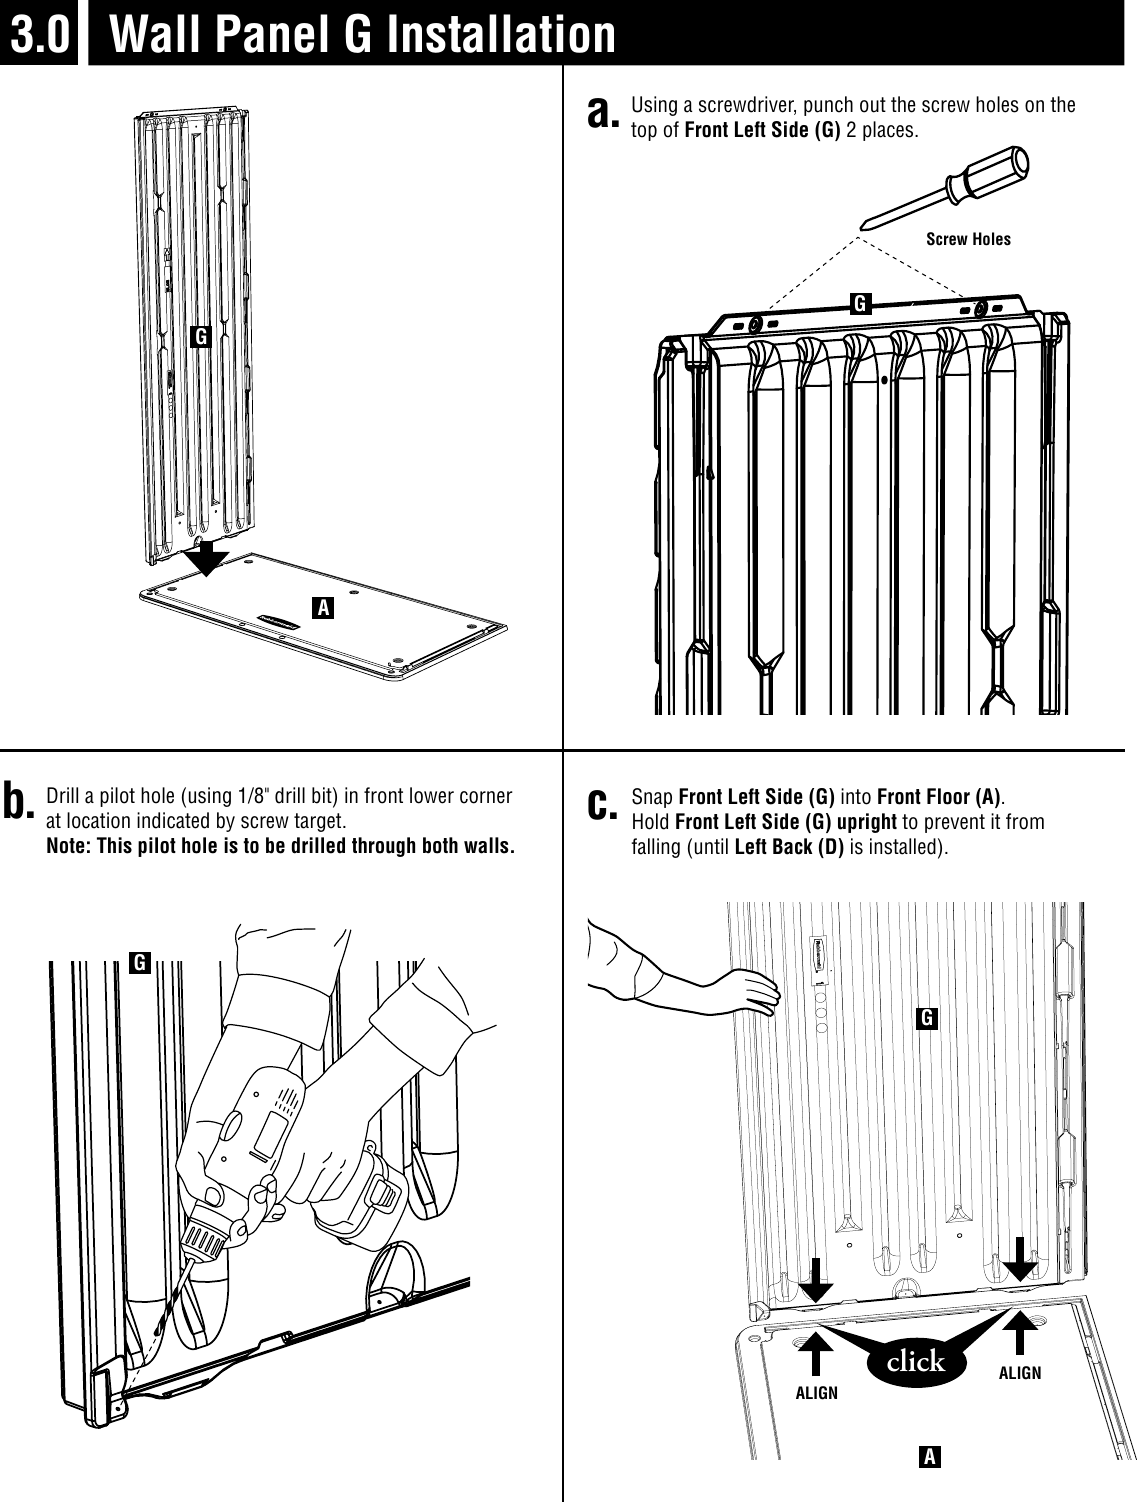 Page 5 of 12 - Rubbermaid Rubbermaid-Outdoor-Storage-5L10-Users-Manual- 5L10 Assembly Instructions English  Rubbermaid-outdoor-storage-5l10-users-manual